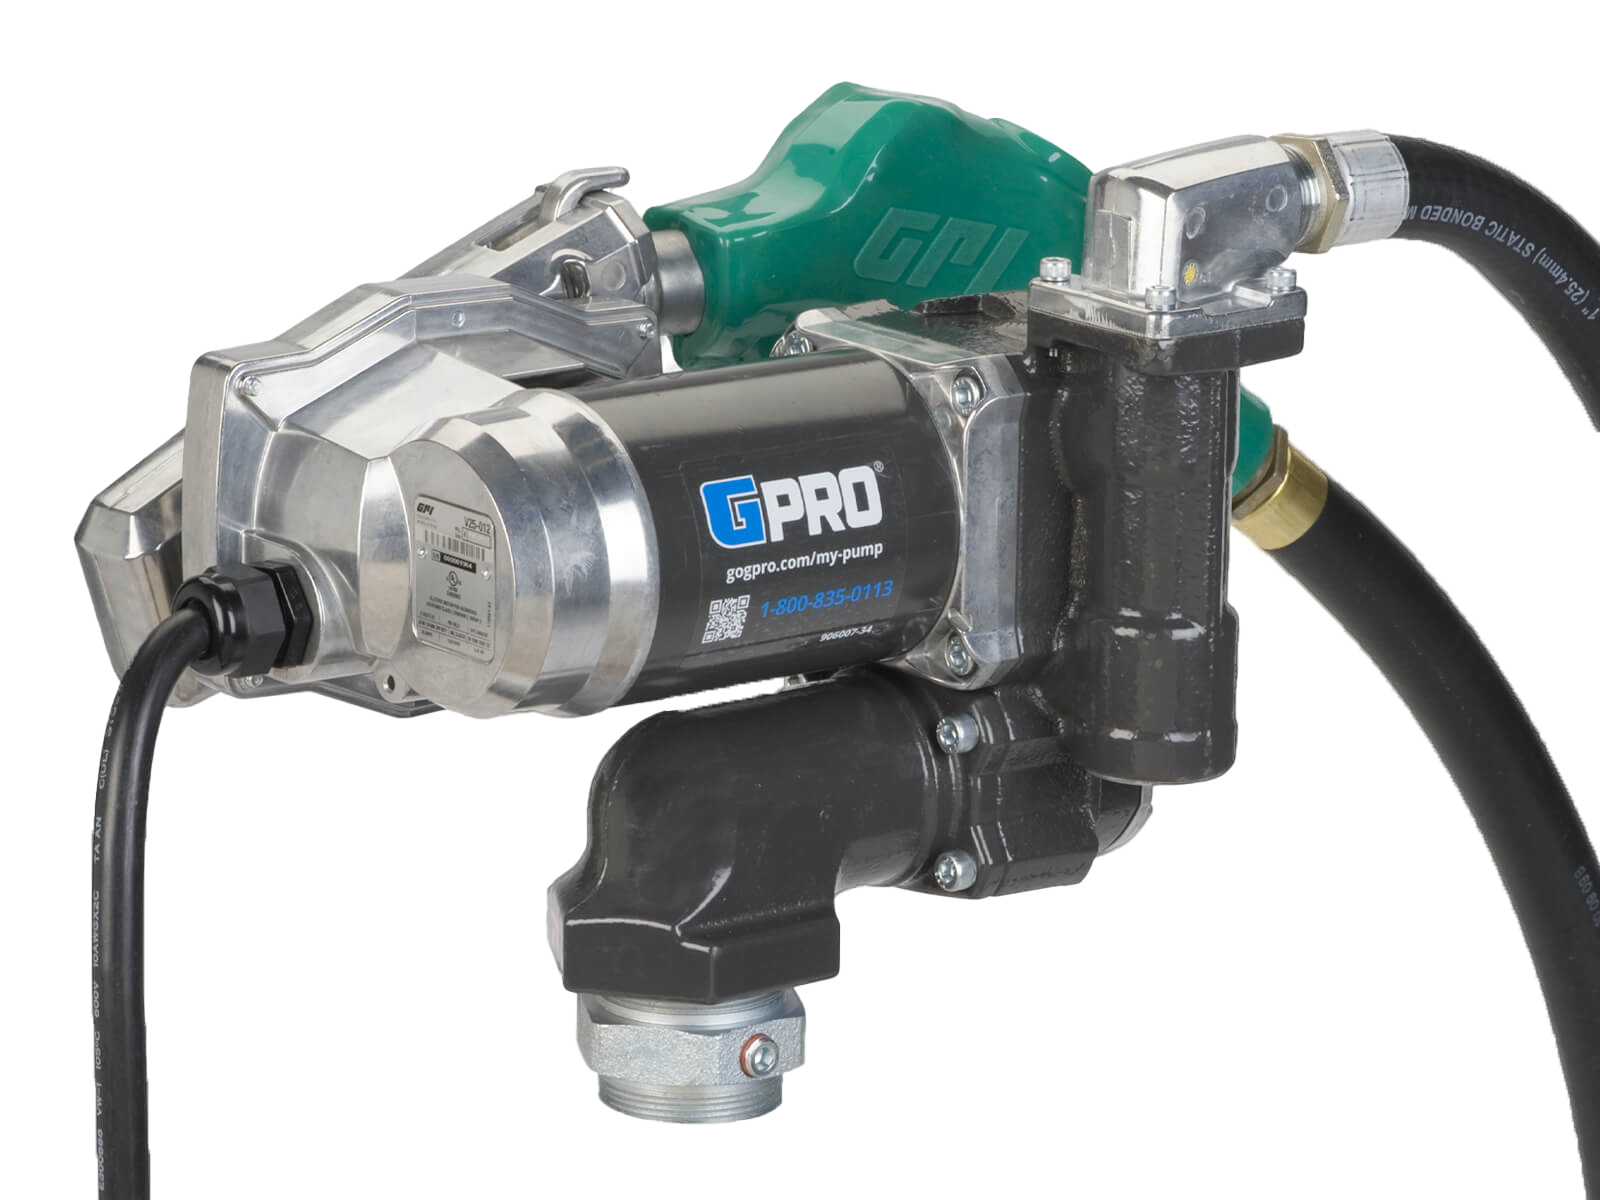 Electric pump GPI #V25-012AD (R666T-2-00), 12 volts, 95LPM (25GPM), automatic nozzle 1", hose 1"x18ft, telescopic suction pipe (15" @ 40") include